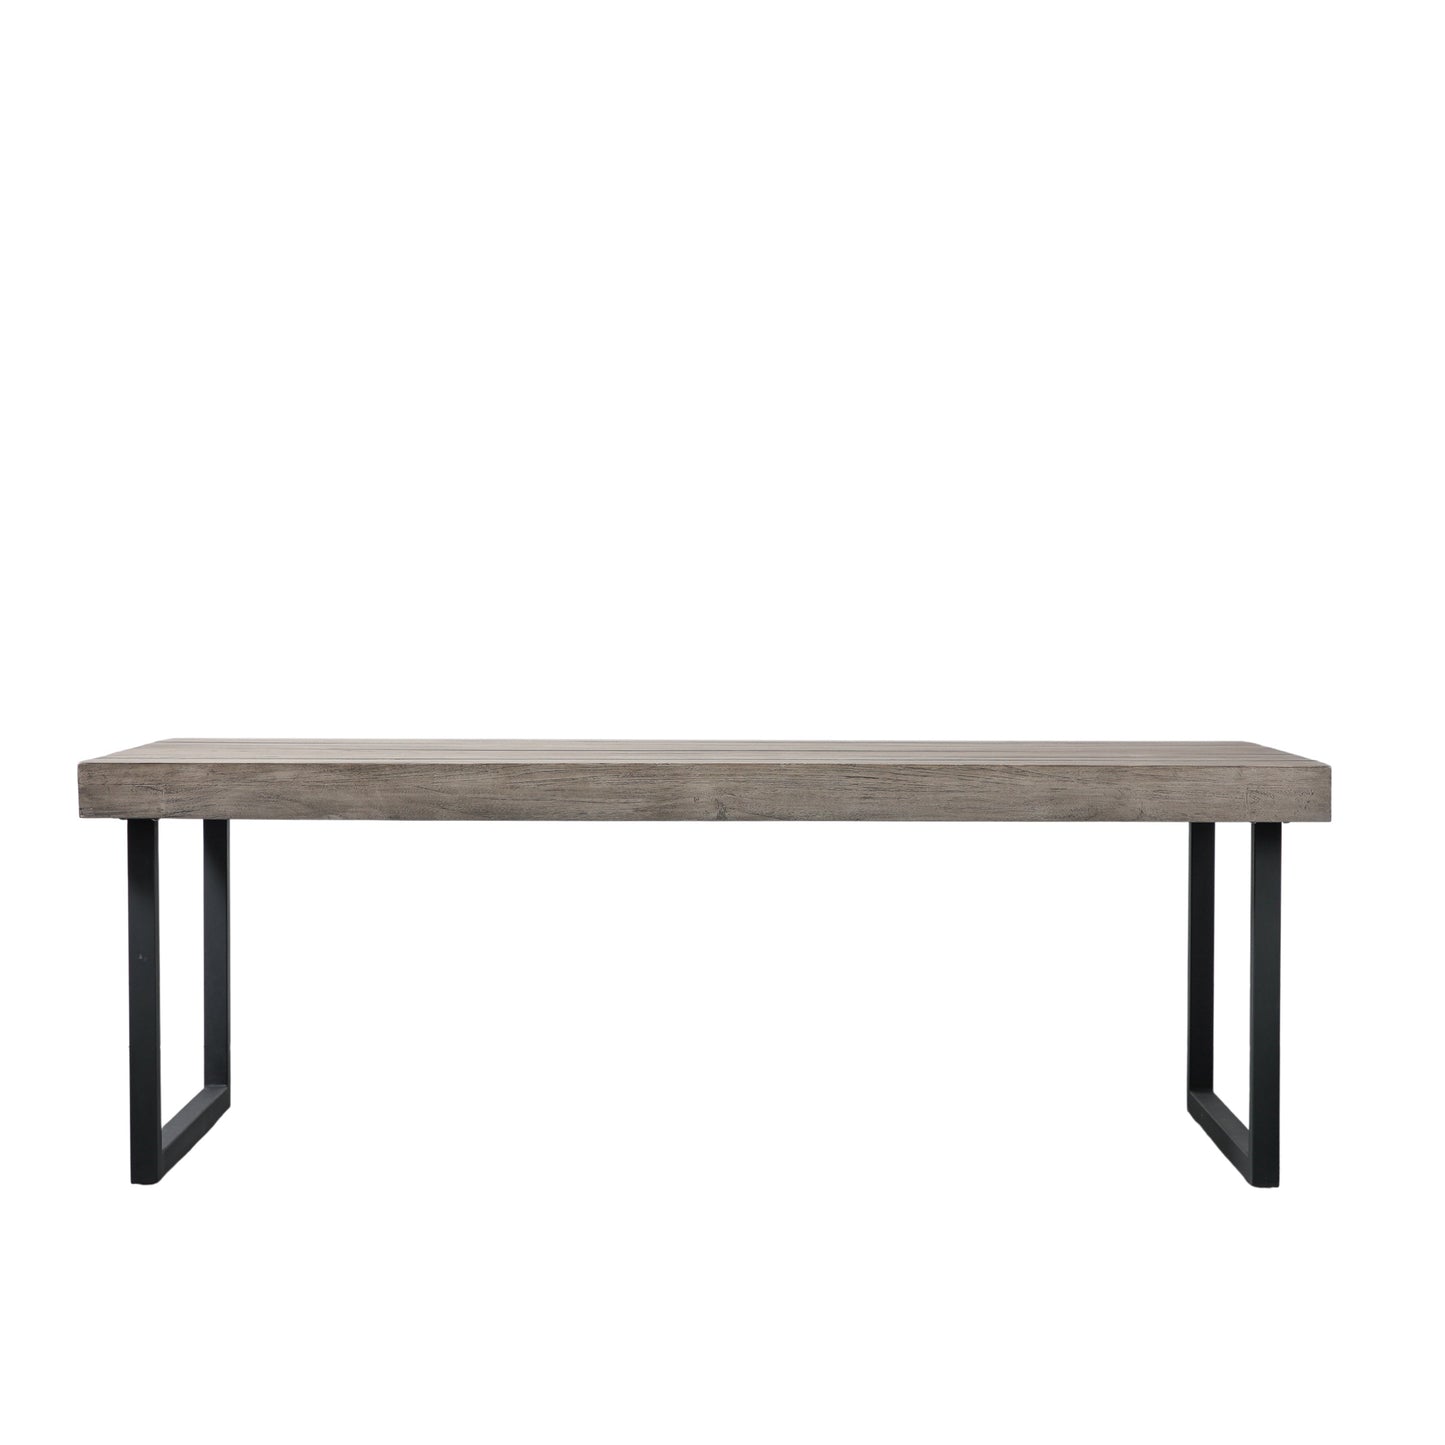 A Bantham Rectangle Dining Table from Kikiathome.co.uk, perfect for interior decor.